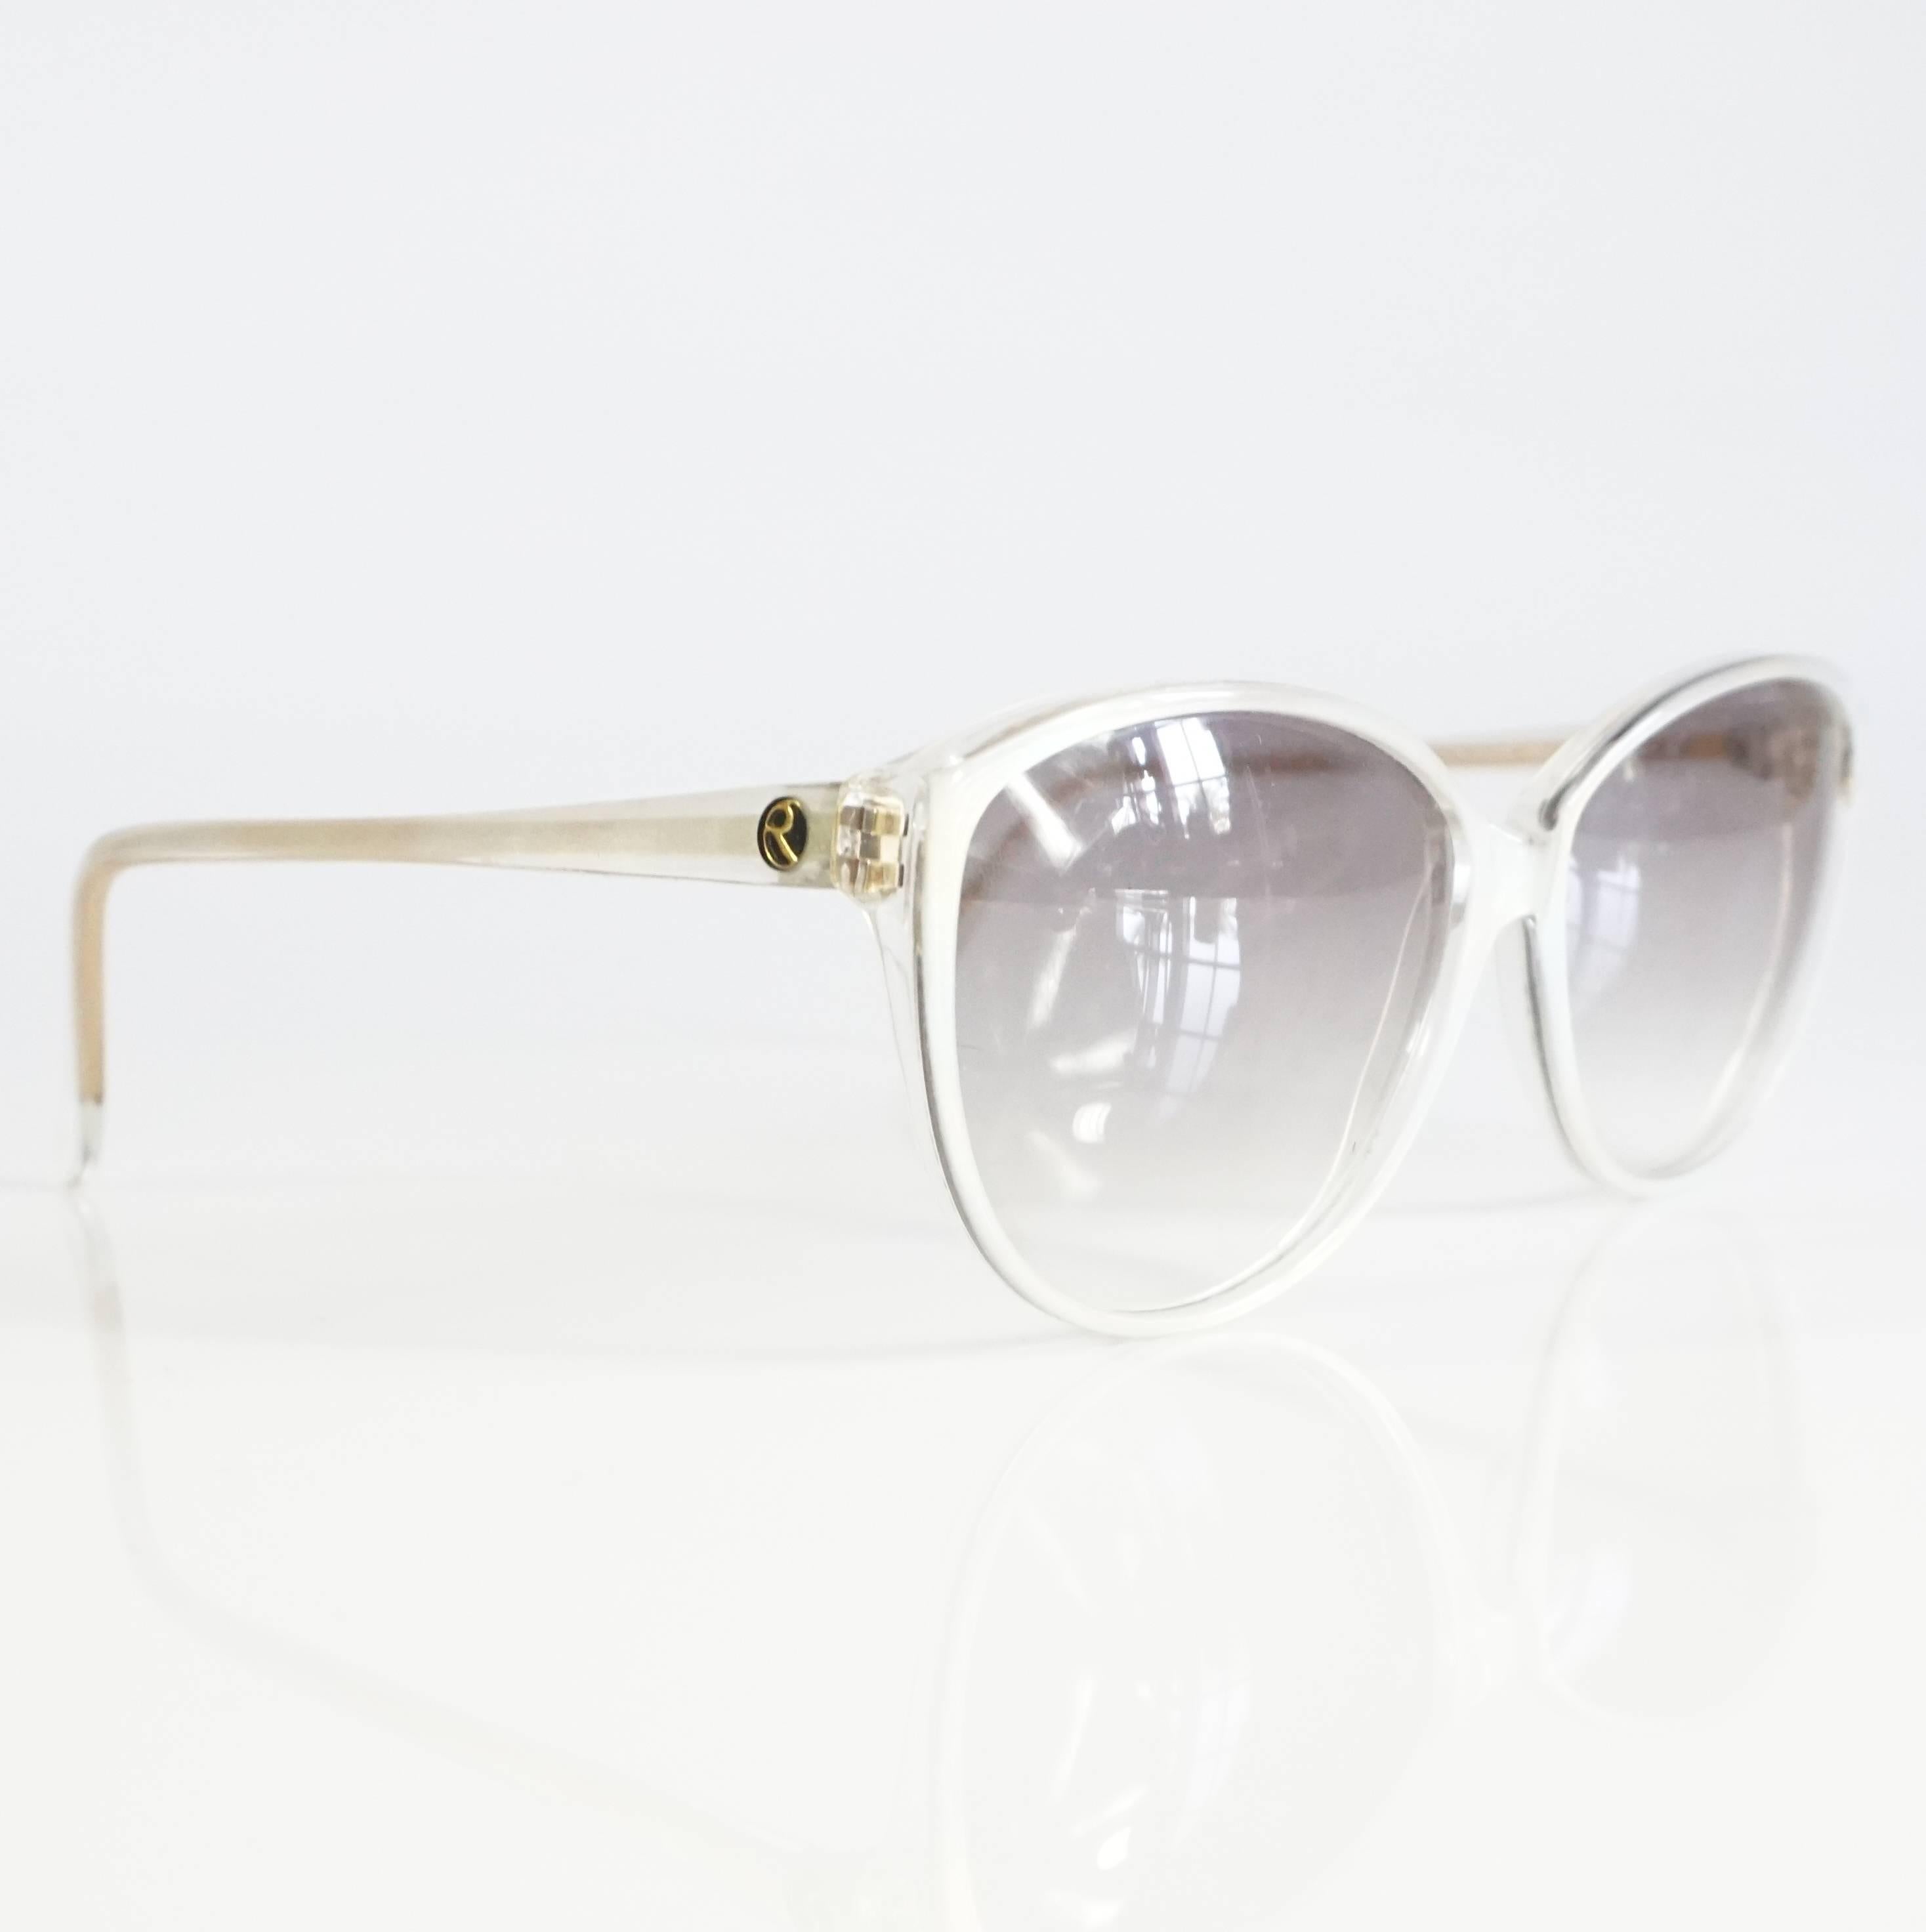 These classy Rochas sunglasses are white Mother of Pearl. They have a large slight cateye shape. They are in excellent condition. Circa 1970's. 

Measurements
Leg Length: 4.75"
Front (lens to lens): 5.5"
Lens Height: 2"
Lens